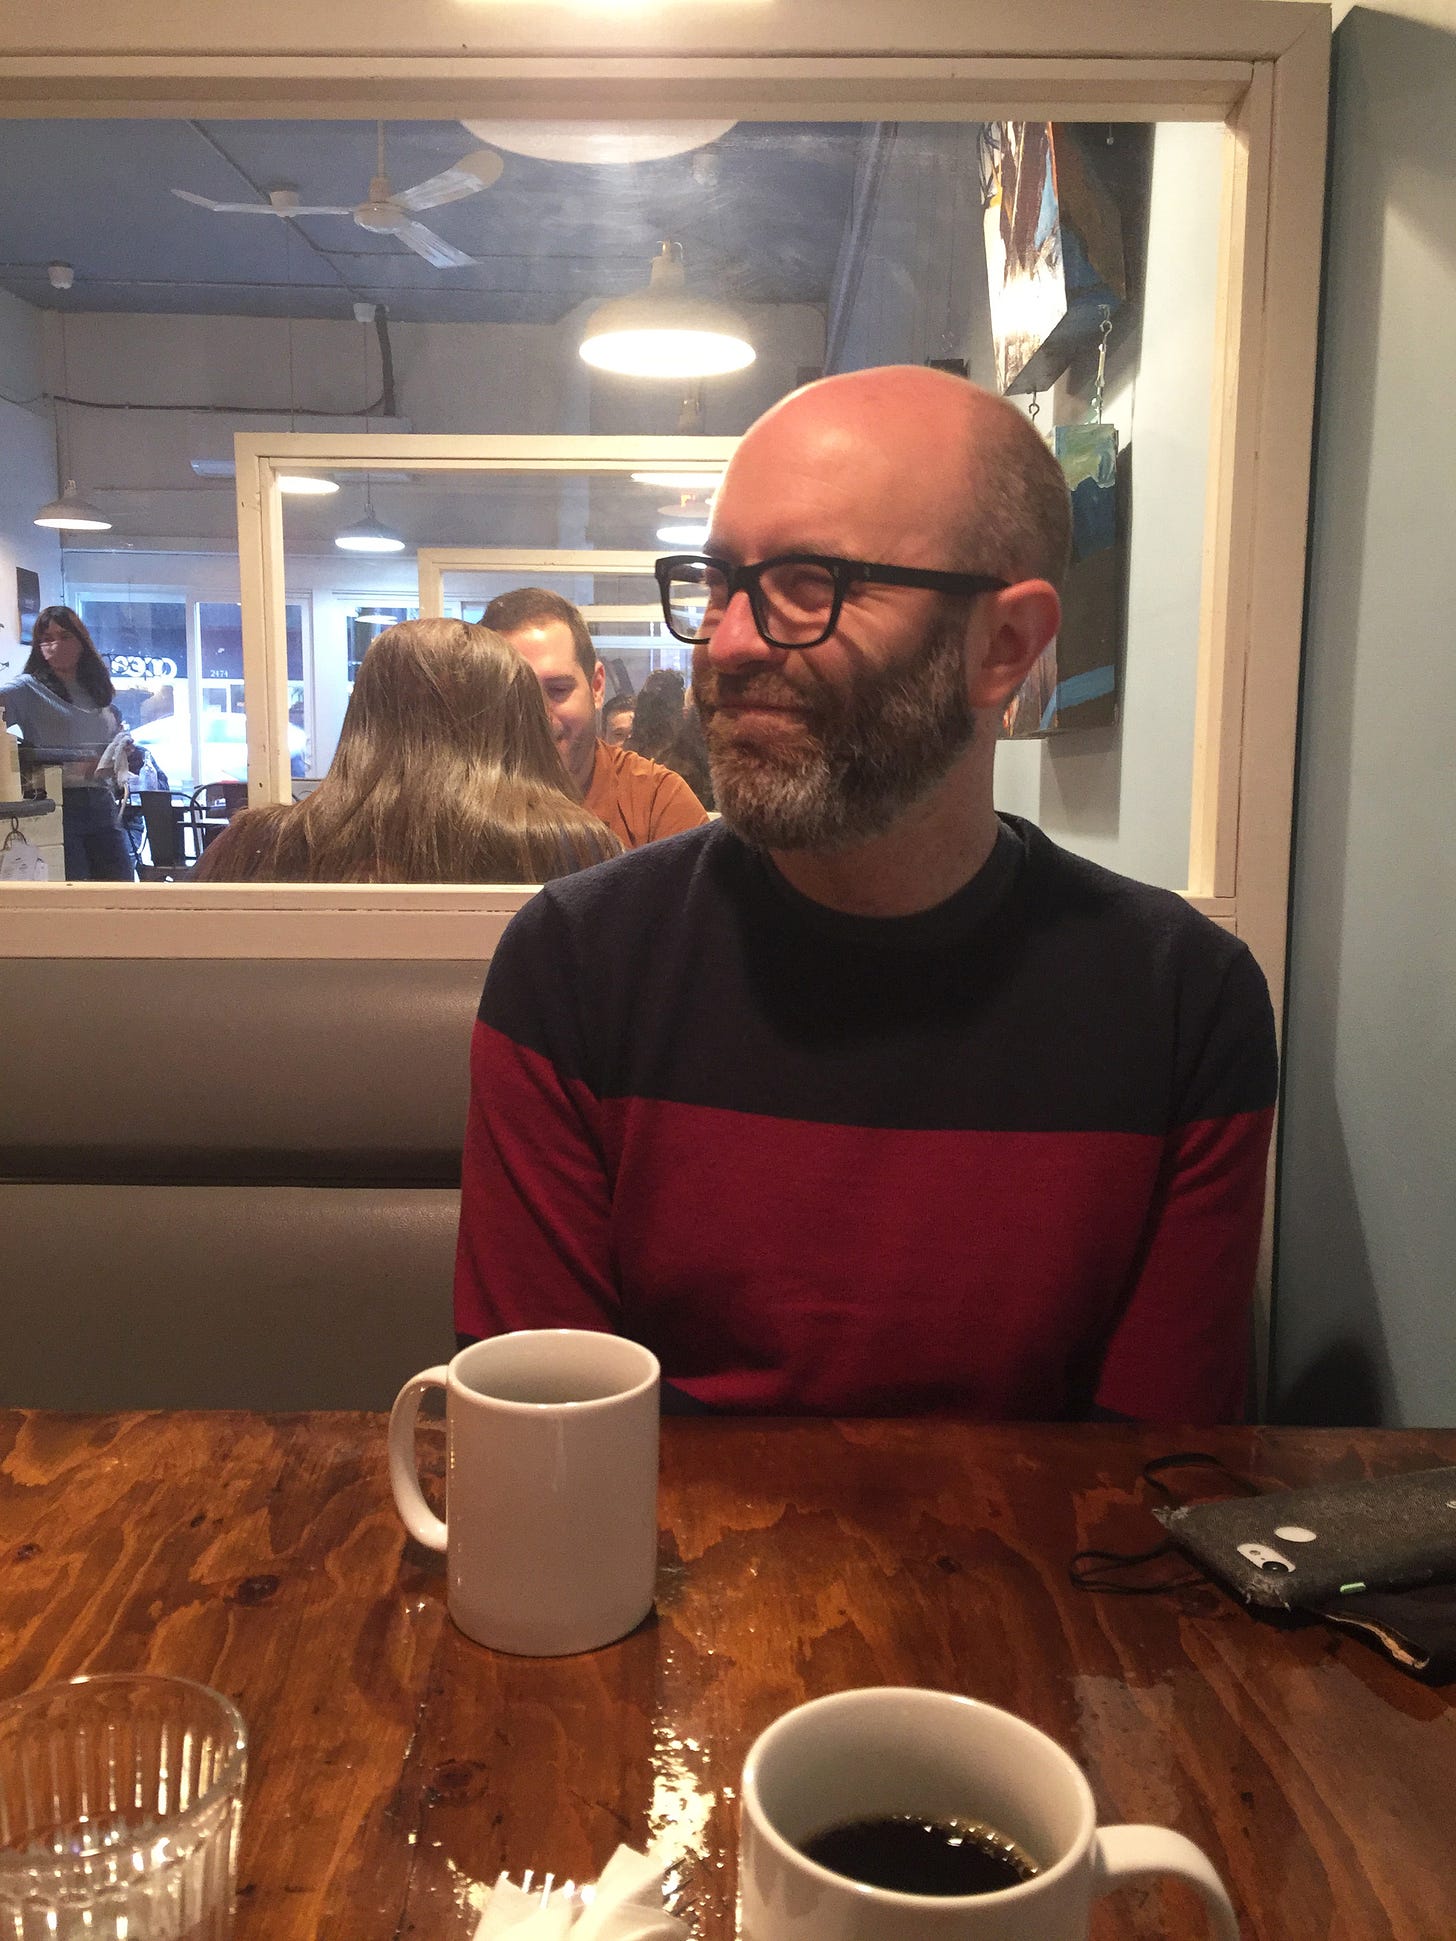 In a restaurant booth with two coffees on the table, Iain looks slightly away from the camera, smirking. He is wearing a blue and red colour blocked sweater.